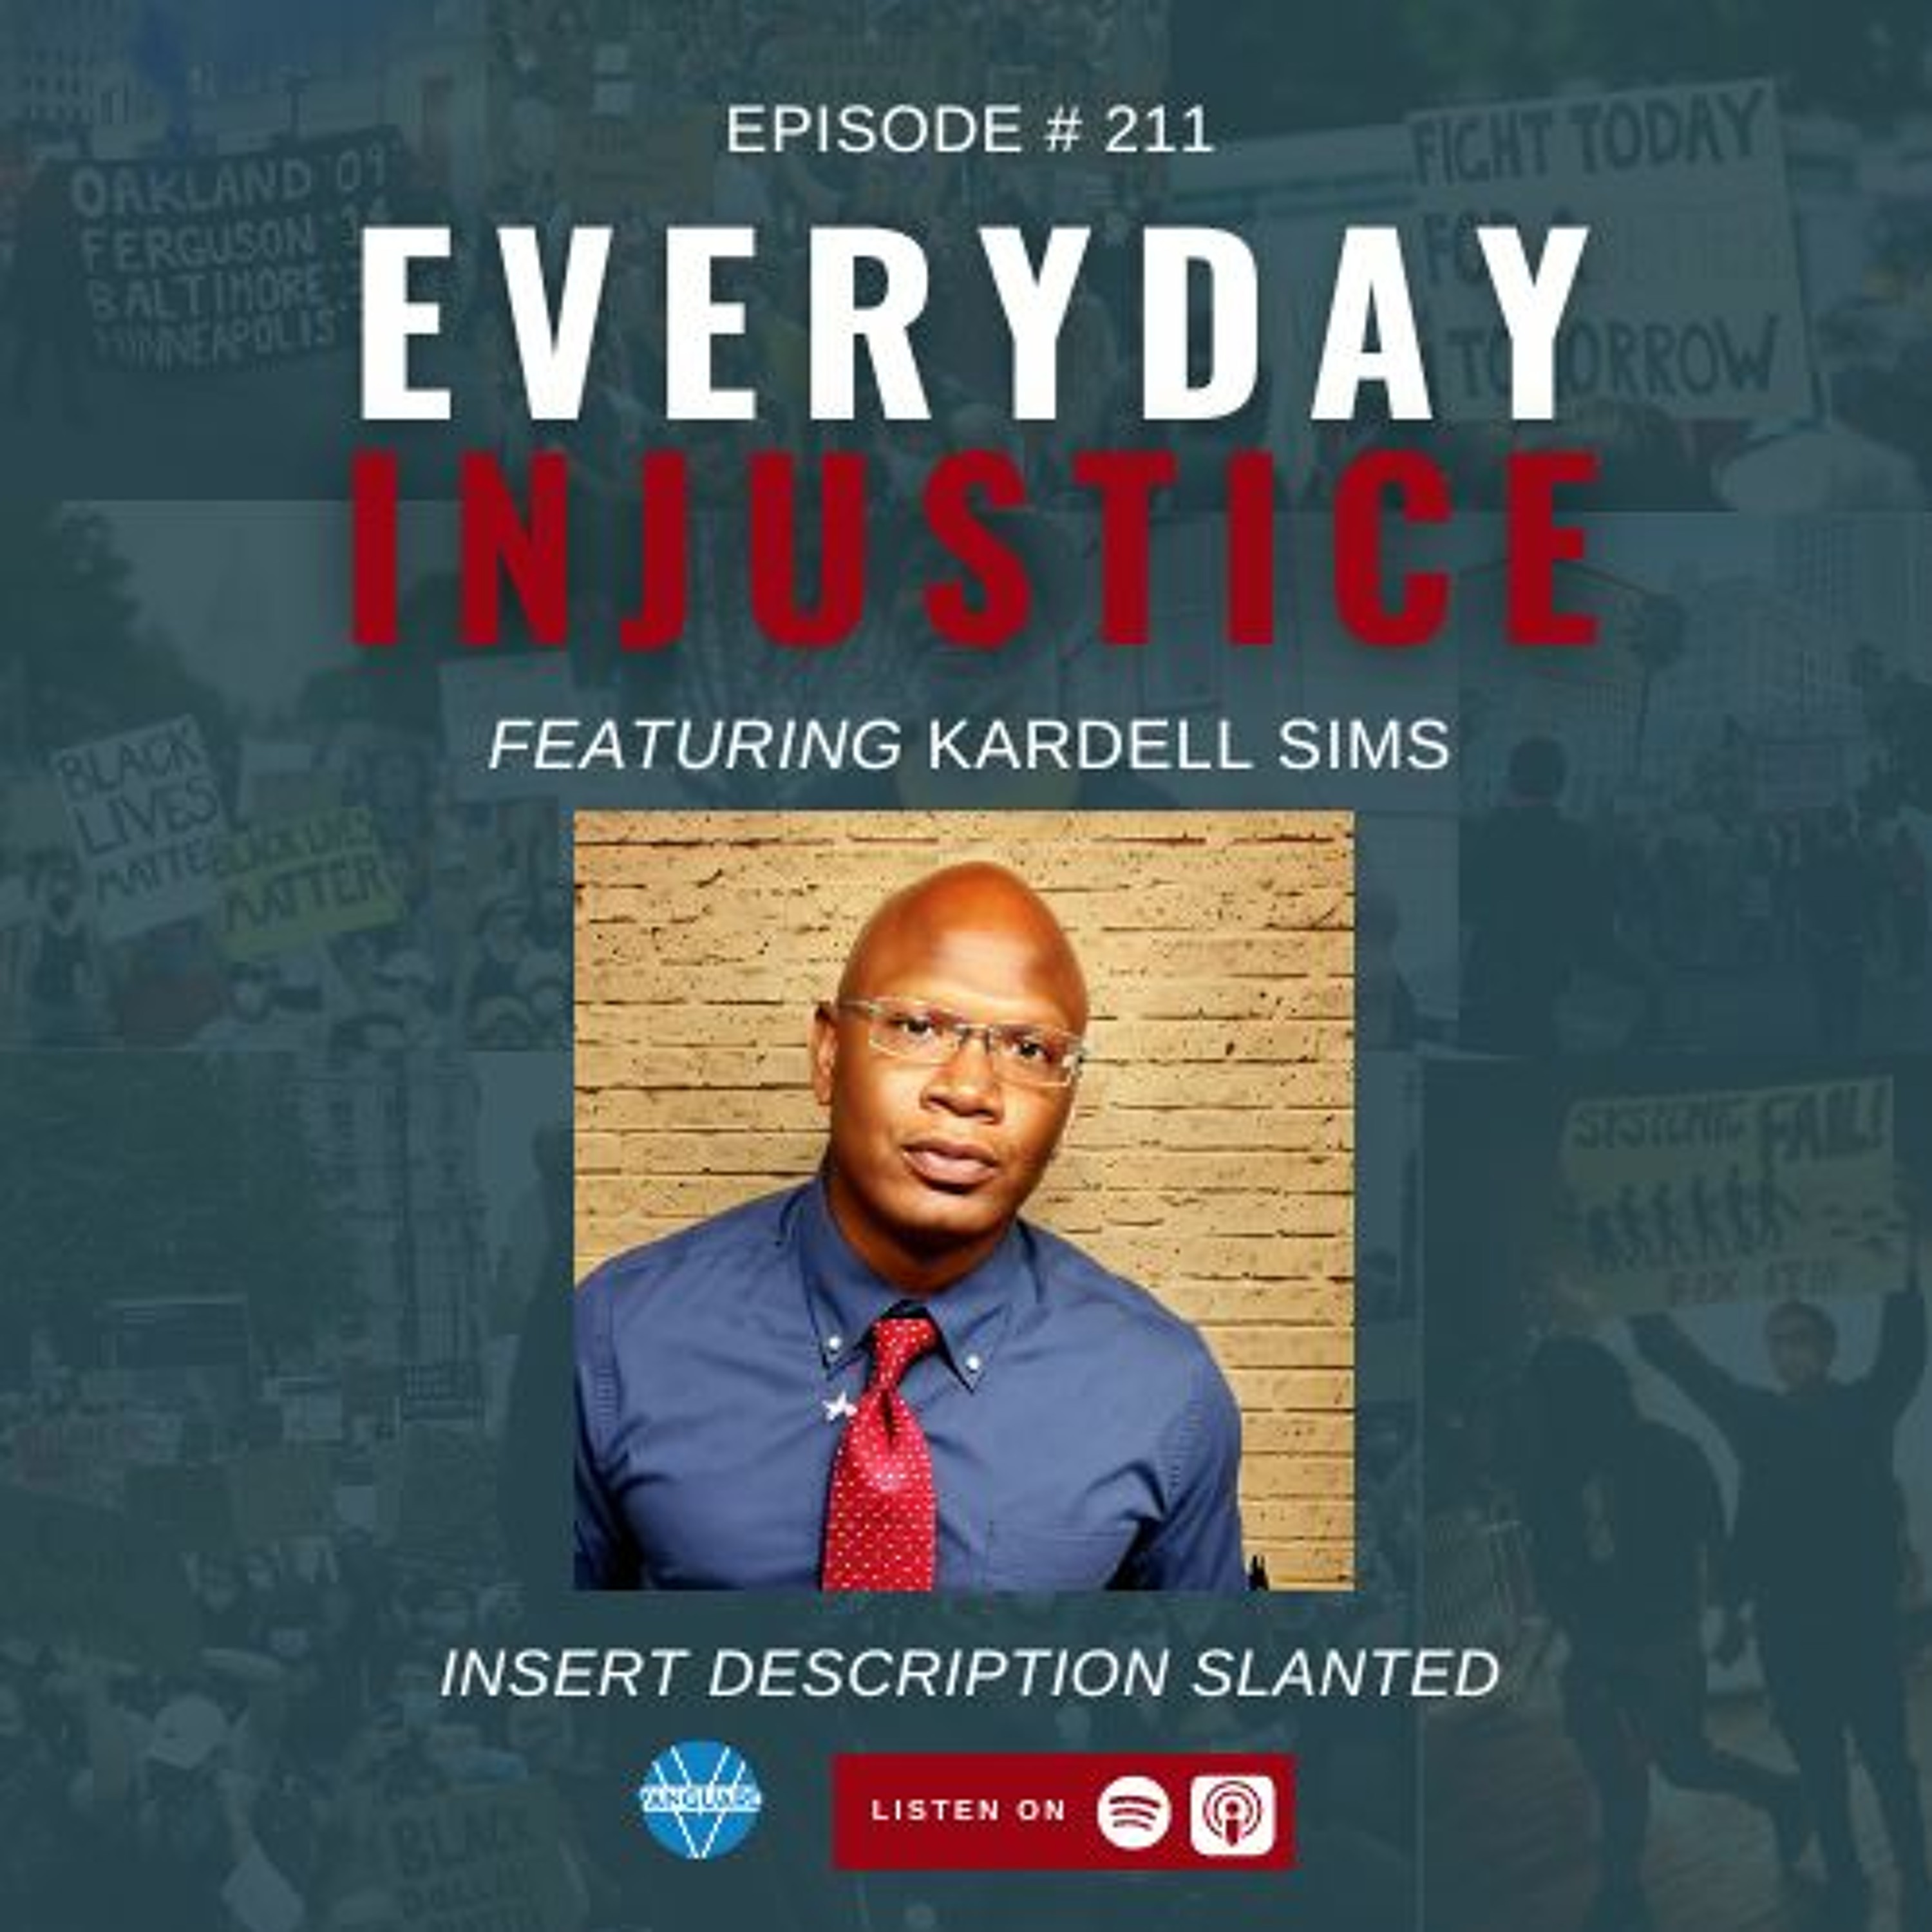 Everyday Injustice Episode 211: Kardell Sims and the Re-Entry Journey